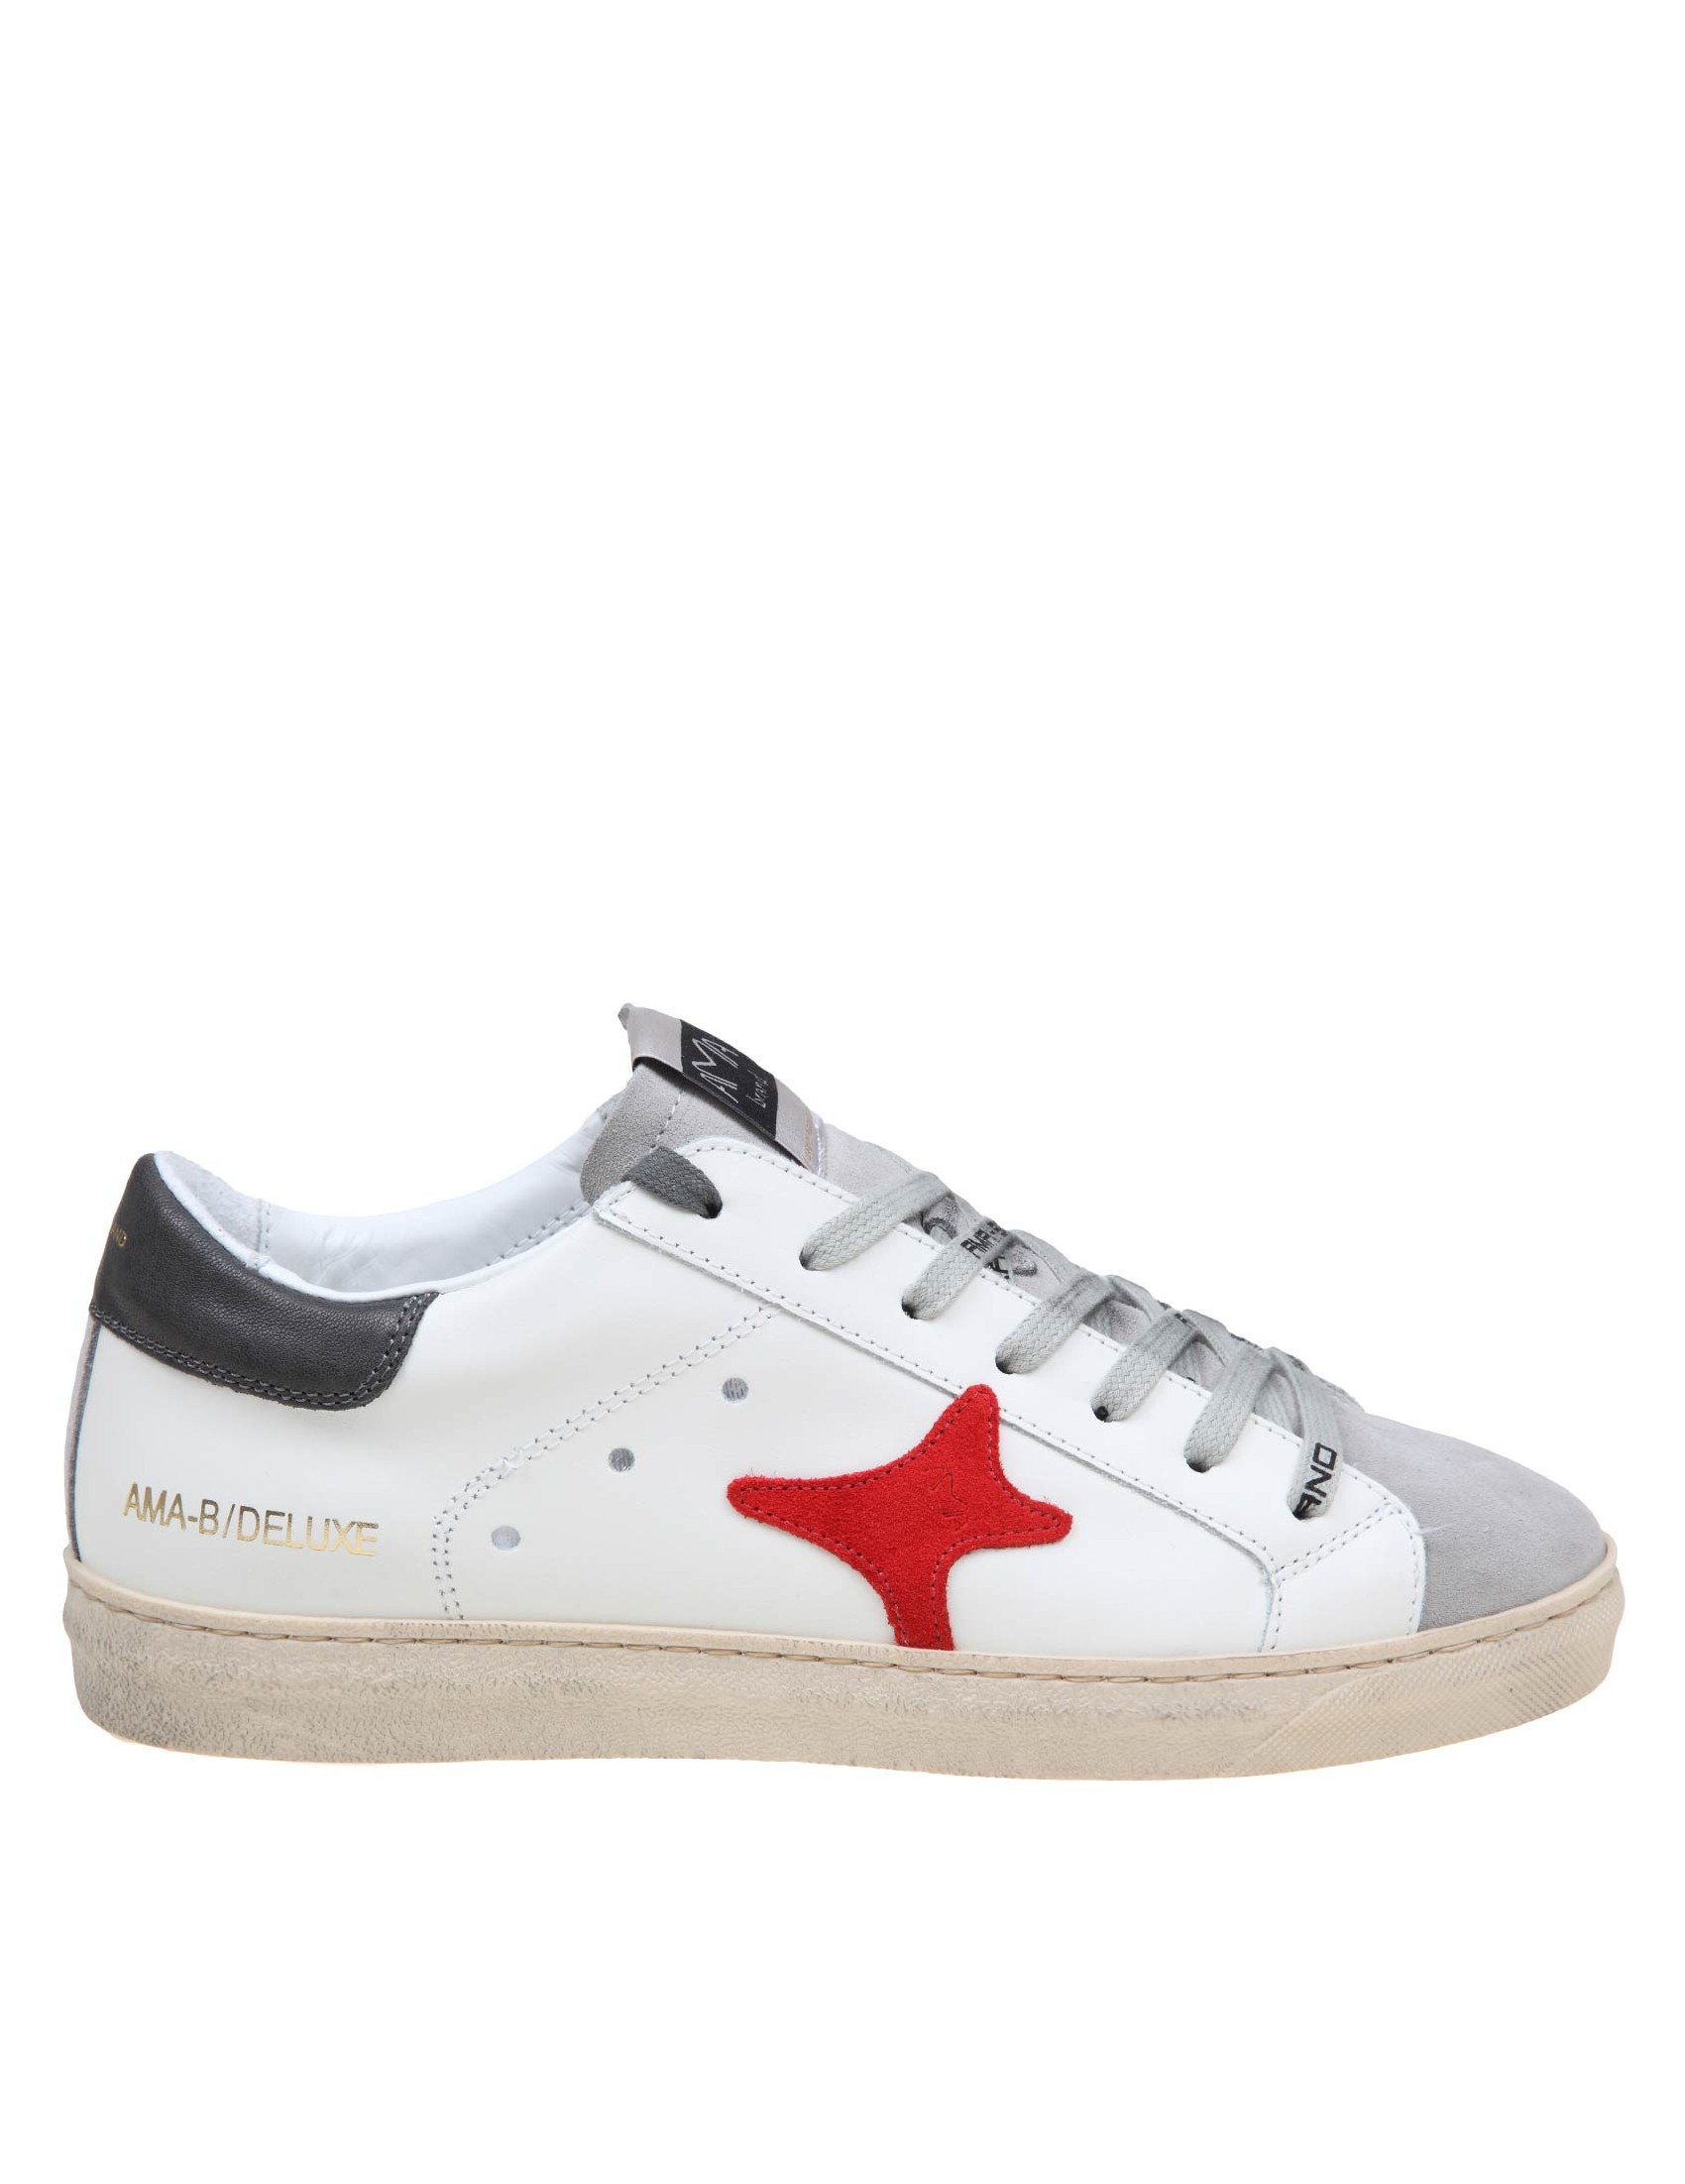 AMA BRAND WHITE AND RED LEATHER SNEAKERS